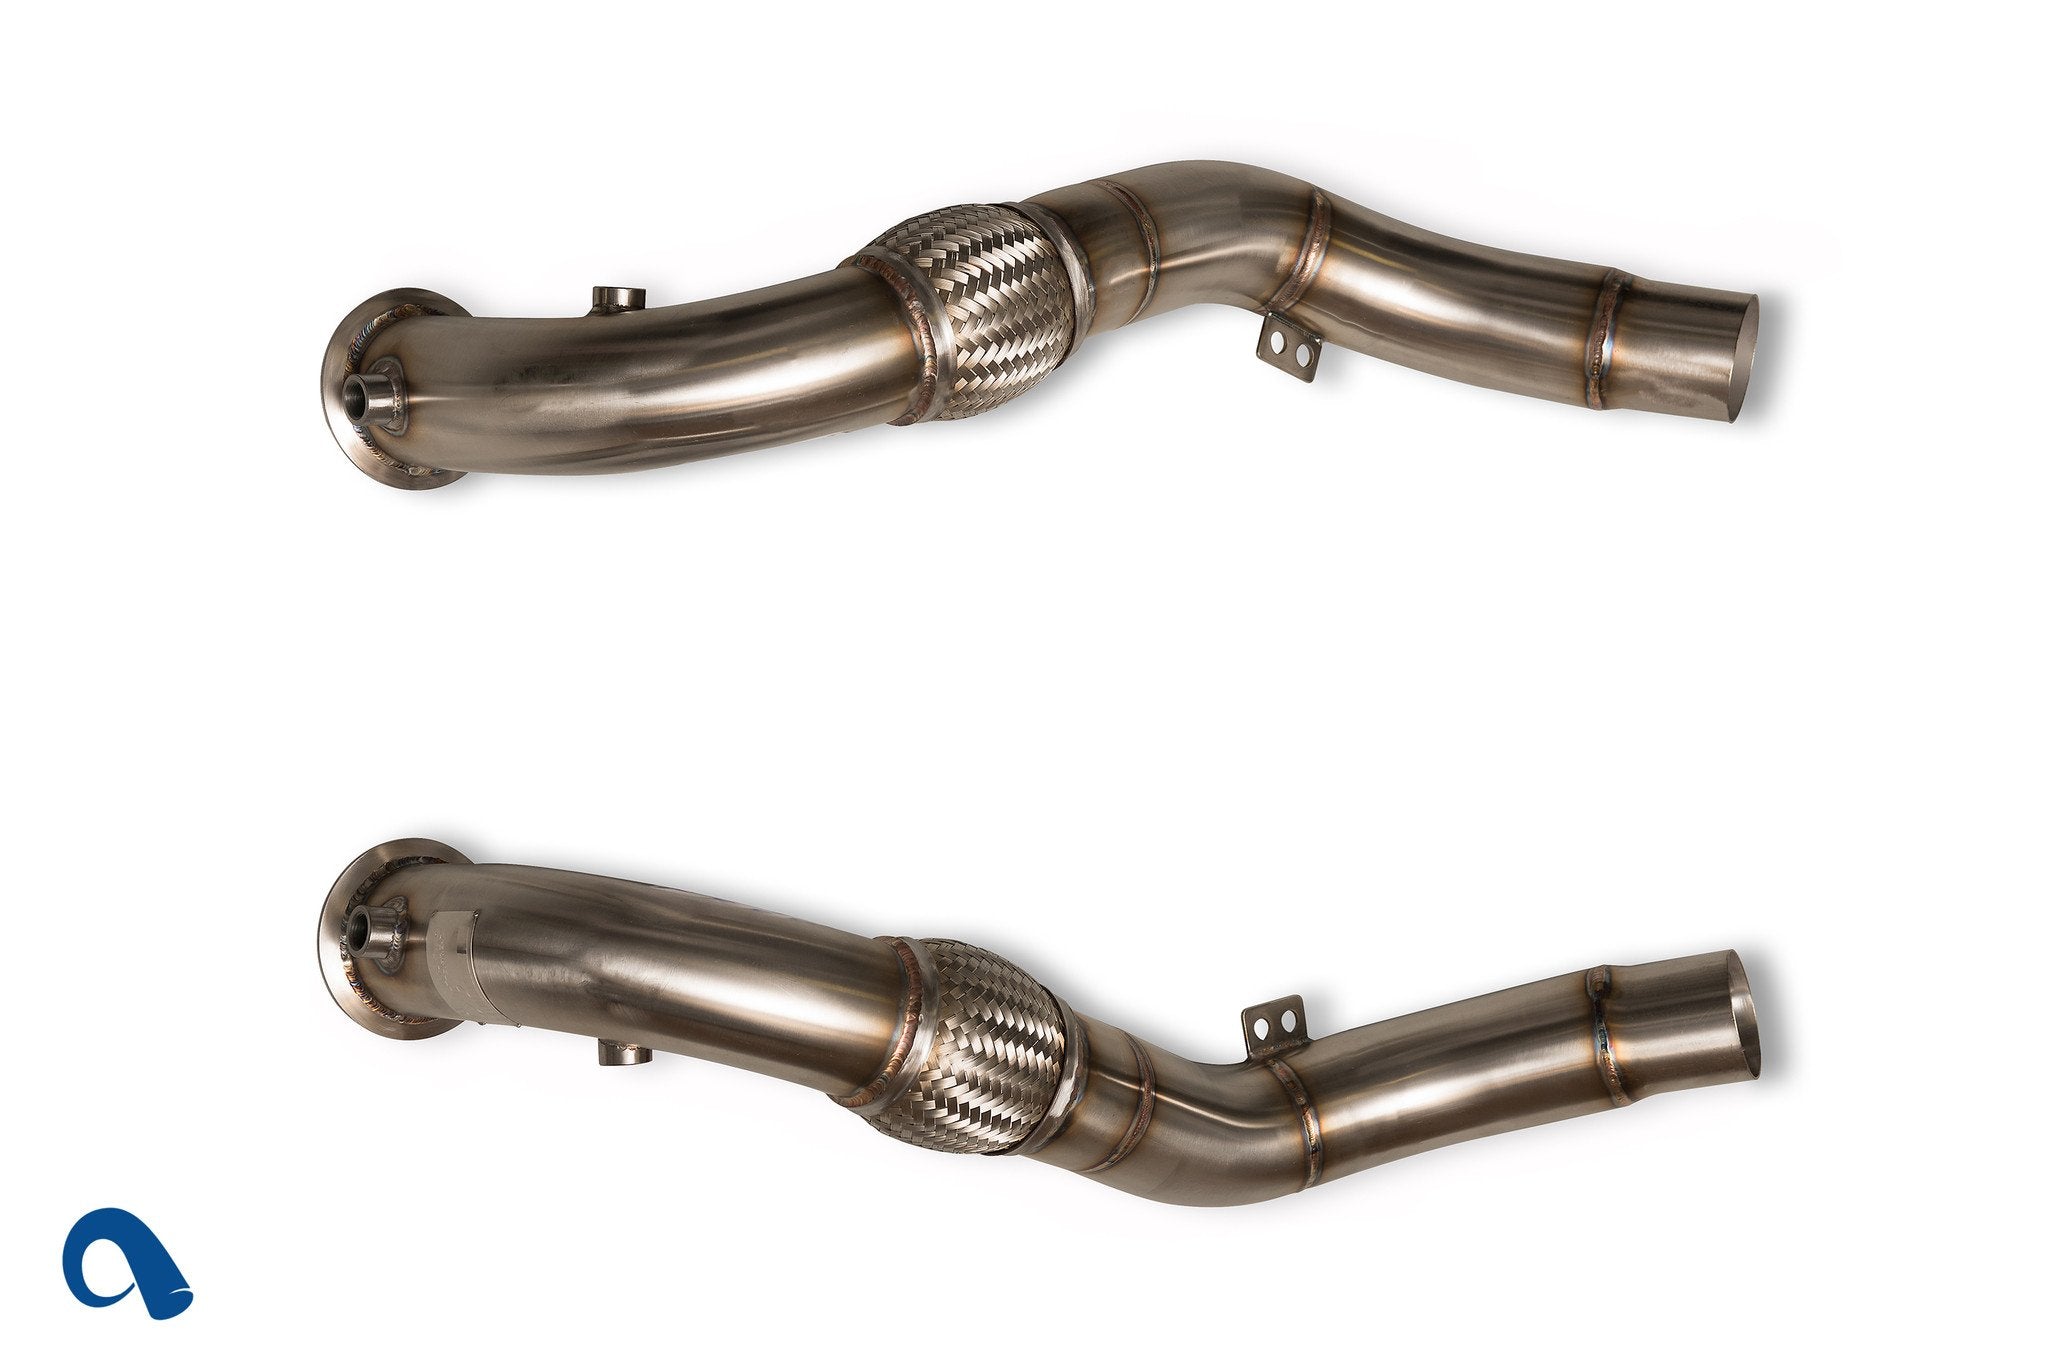 BMW N63 DOWNPIPES FOR | TWIN-TURBO V8 BMW X5 AND X6 | F10 550I BY BMW TUNER, ACTIVE AUTOWERKE - 0